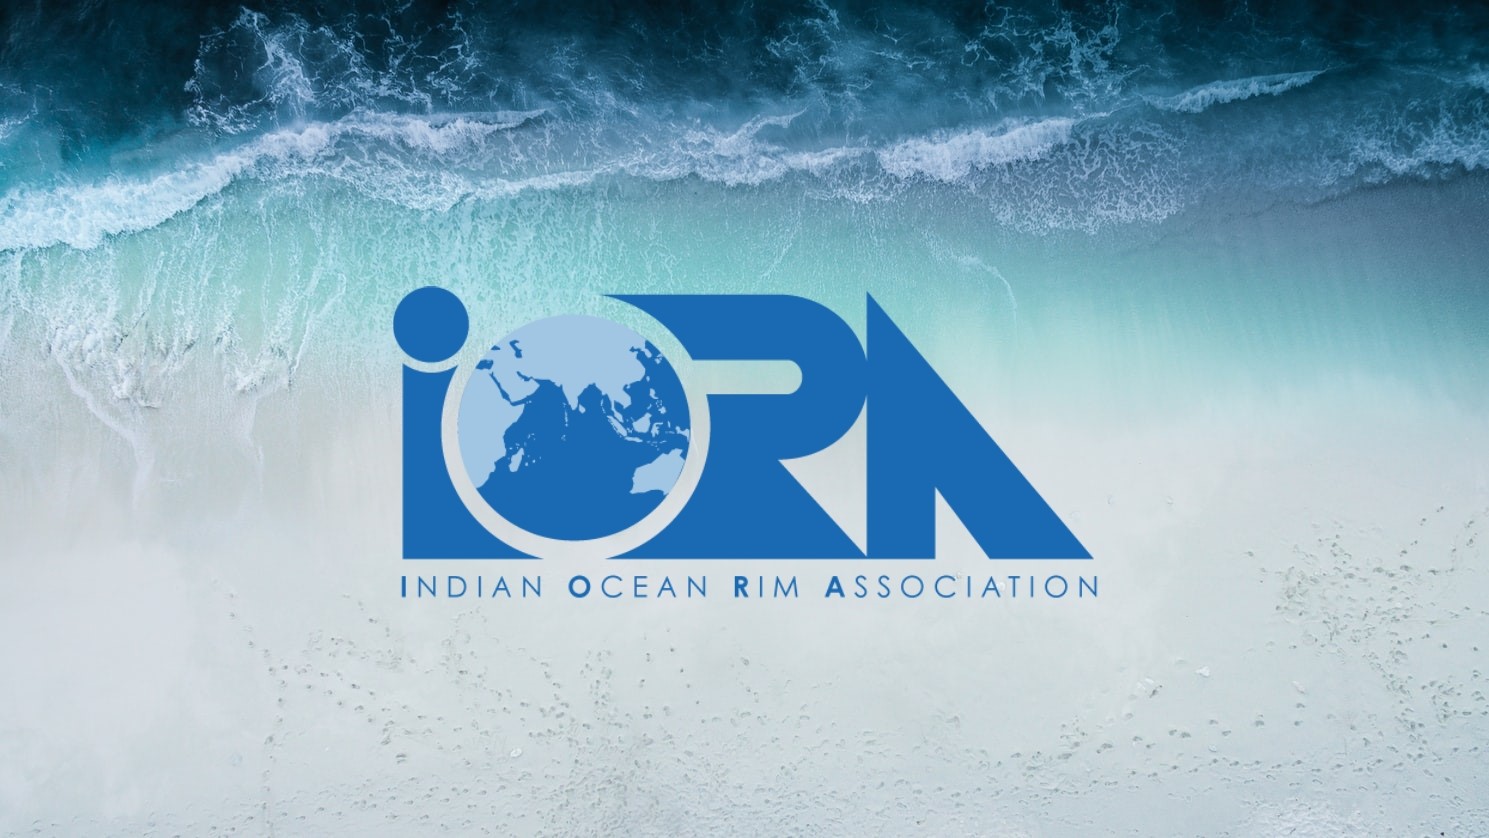 South Africa observes the Indian Ocean Rim Association (IORA) Day